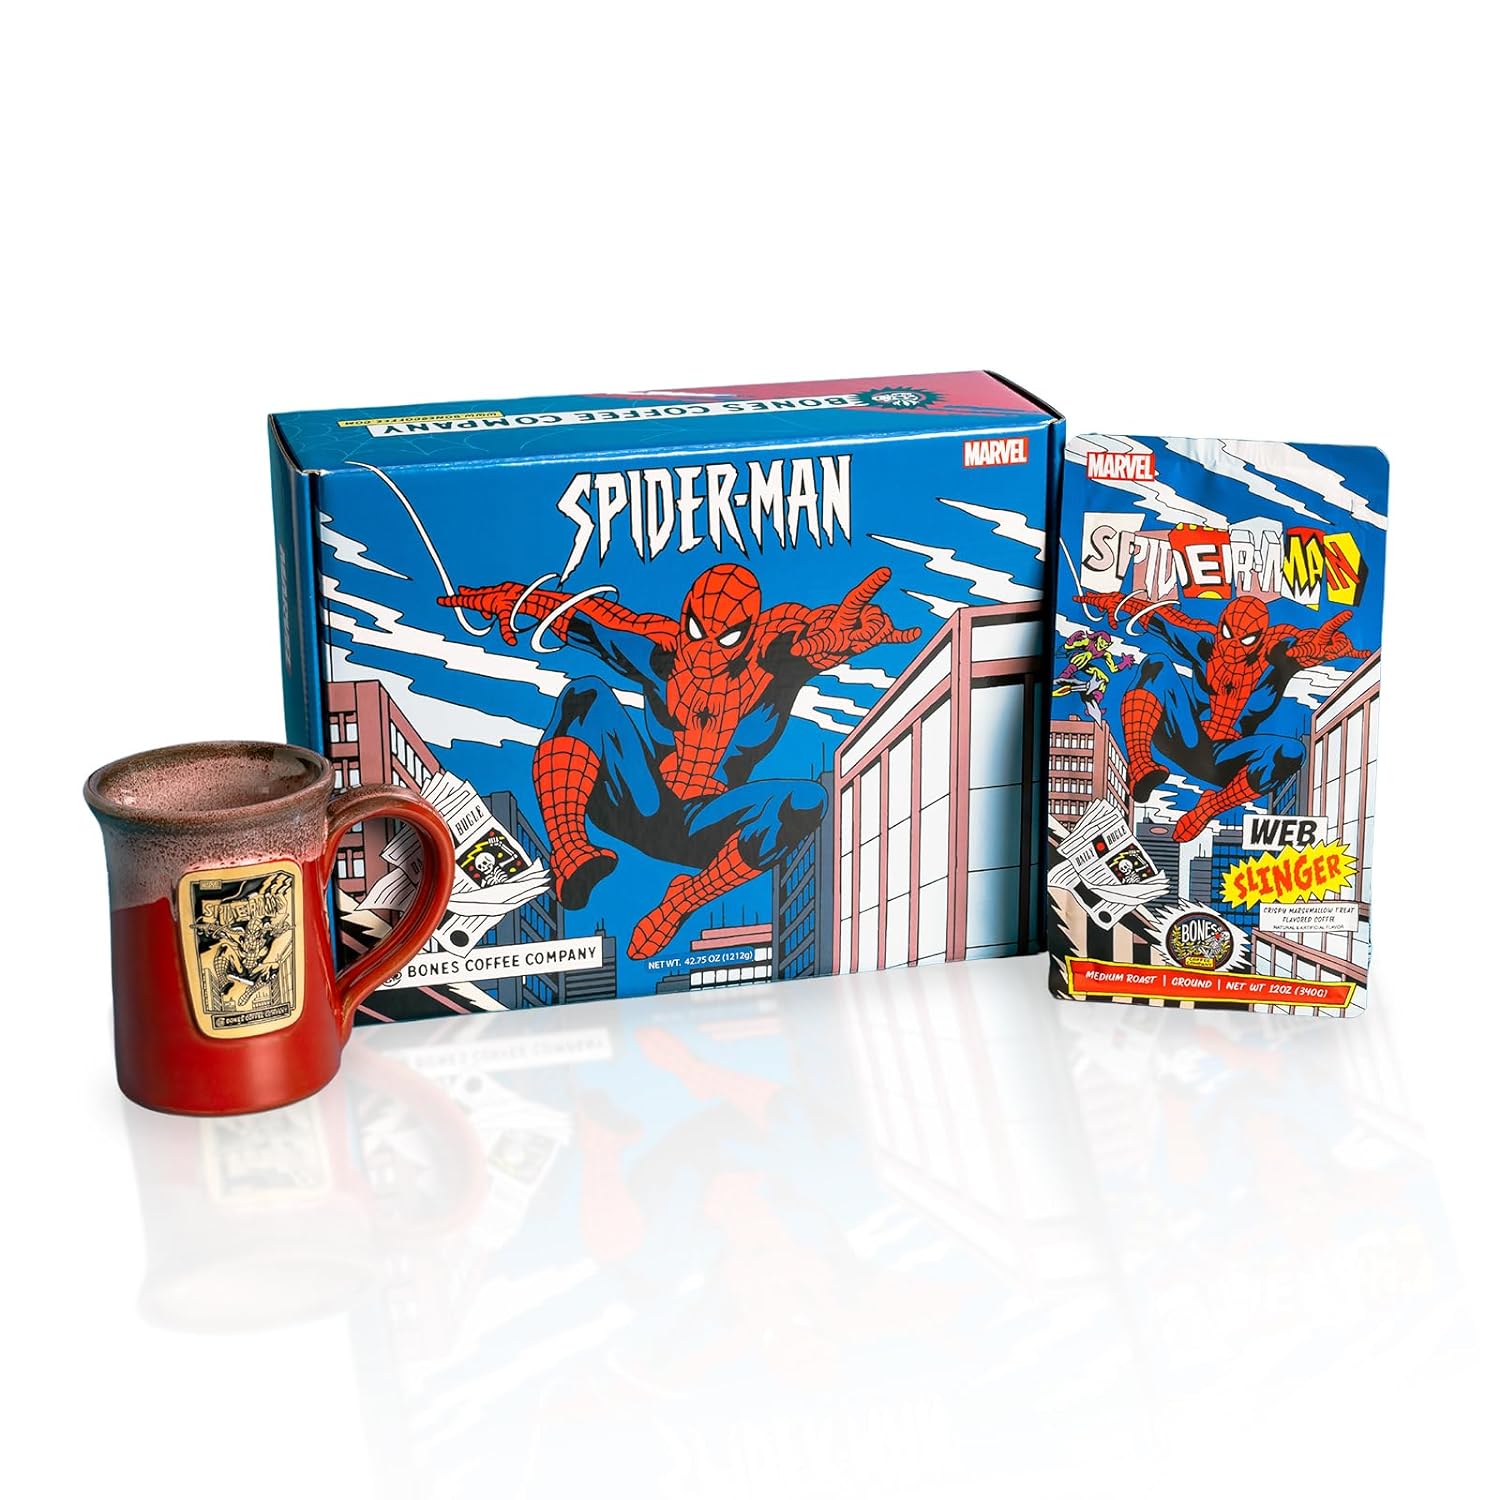 Bones Coffee Company Web Slinger Collector's Box Whole Coffee Beans | 12 oz Crispy Marshmallow Flavor with Handthrown Mug Inspired by Disney's Spiderman (Whole Bean)